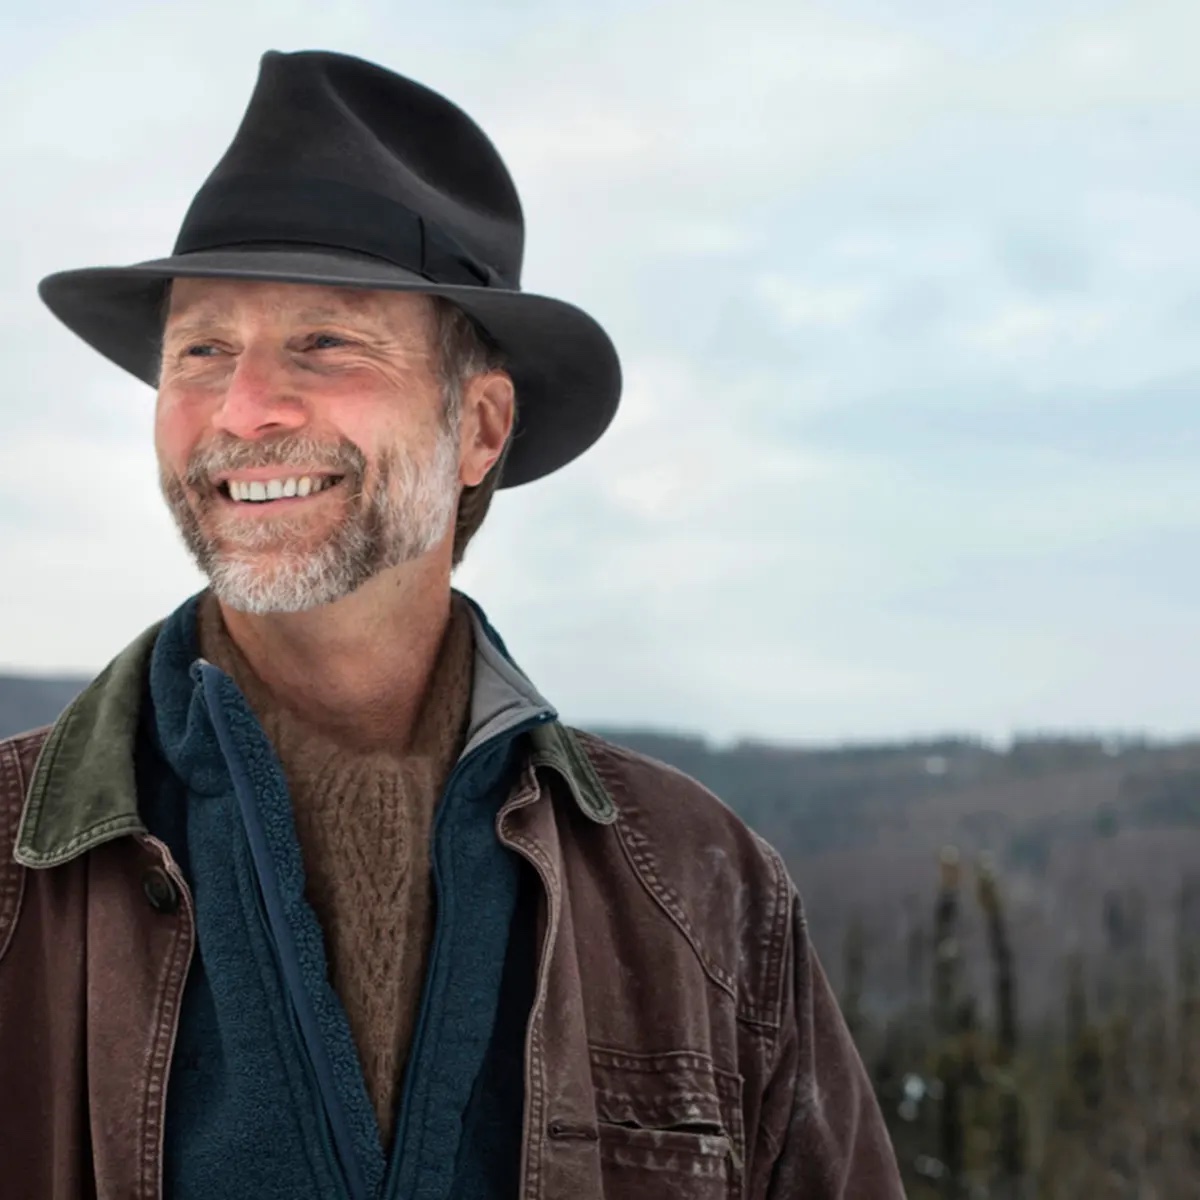 John Luther Adams smiling wearing a hat.